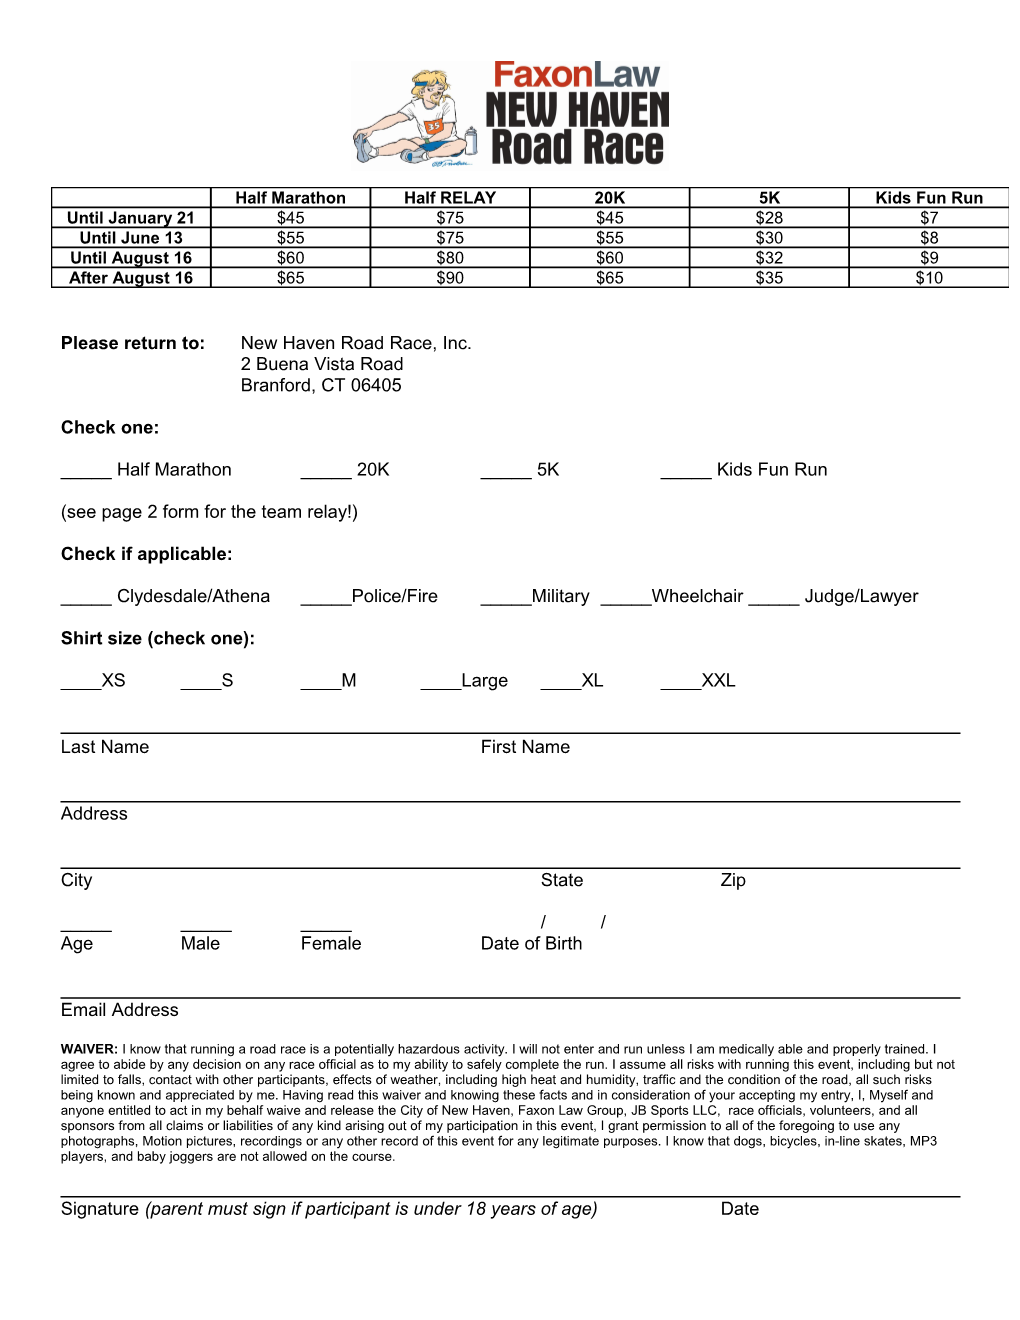 See Page 2 Form for the Team Relay!